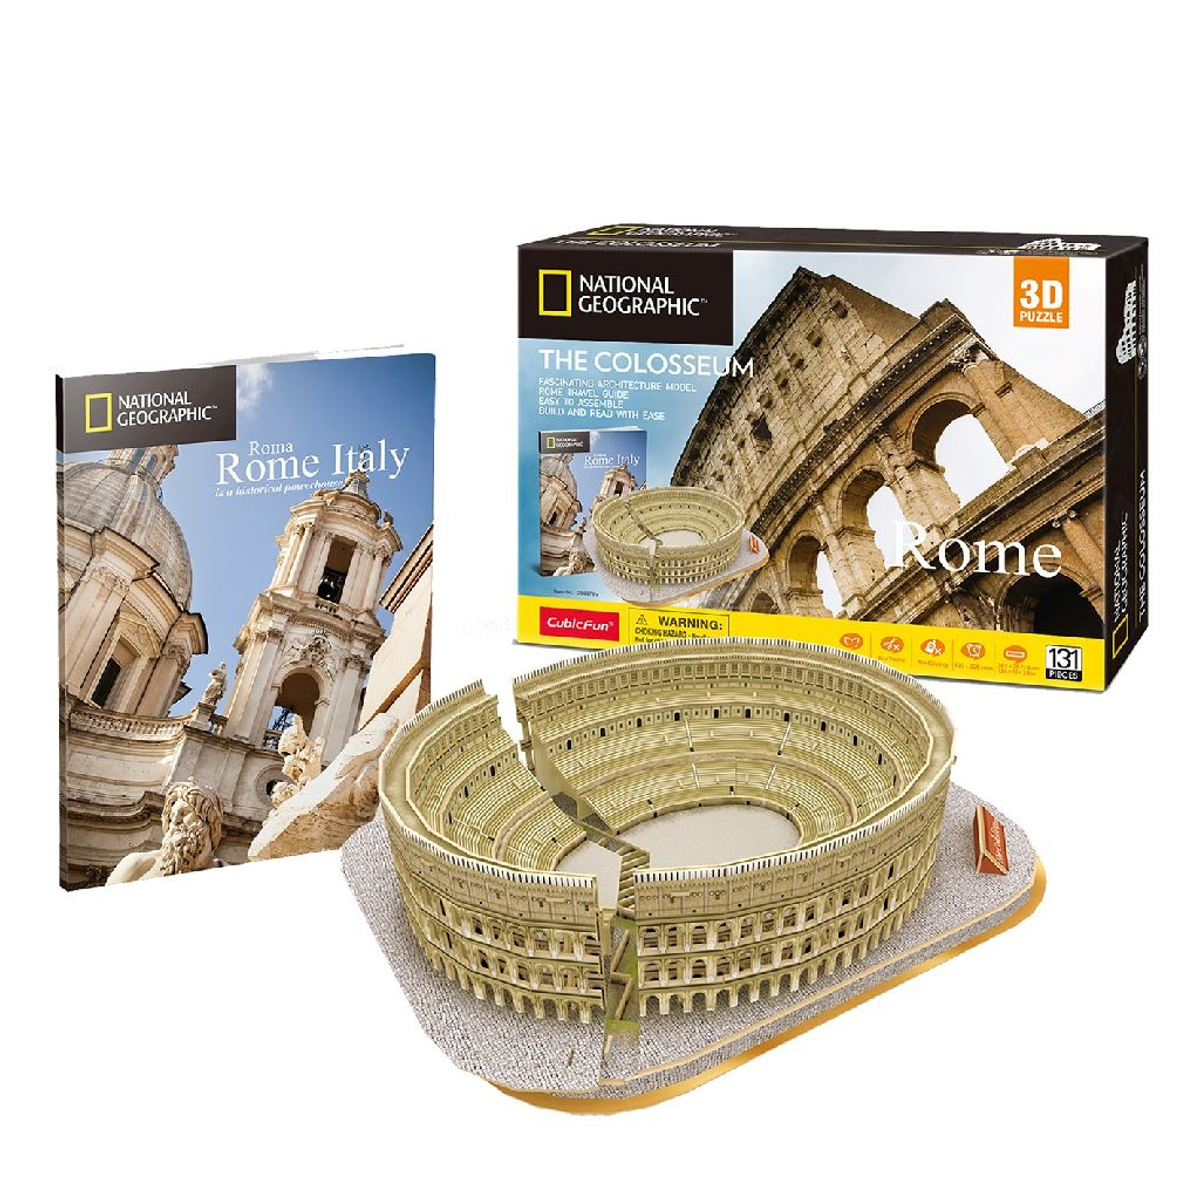 The GEOGRAPHIC NATIONAL Puzzle Colosseum